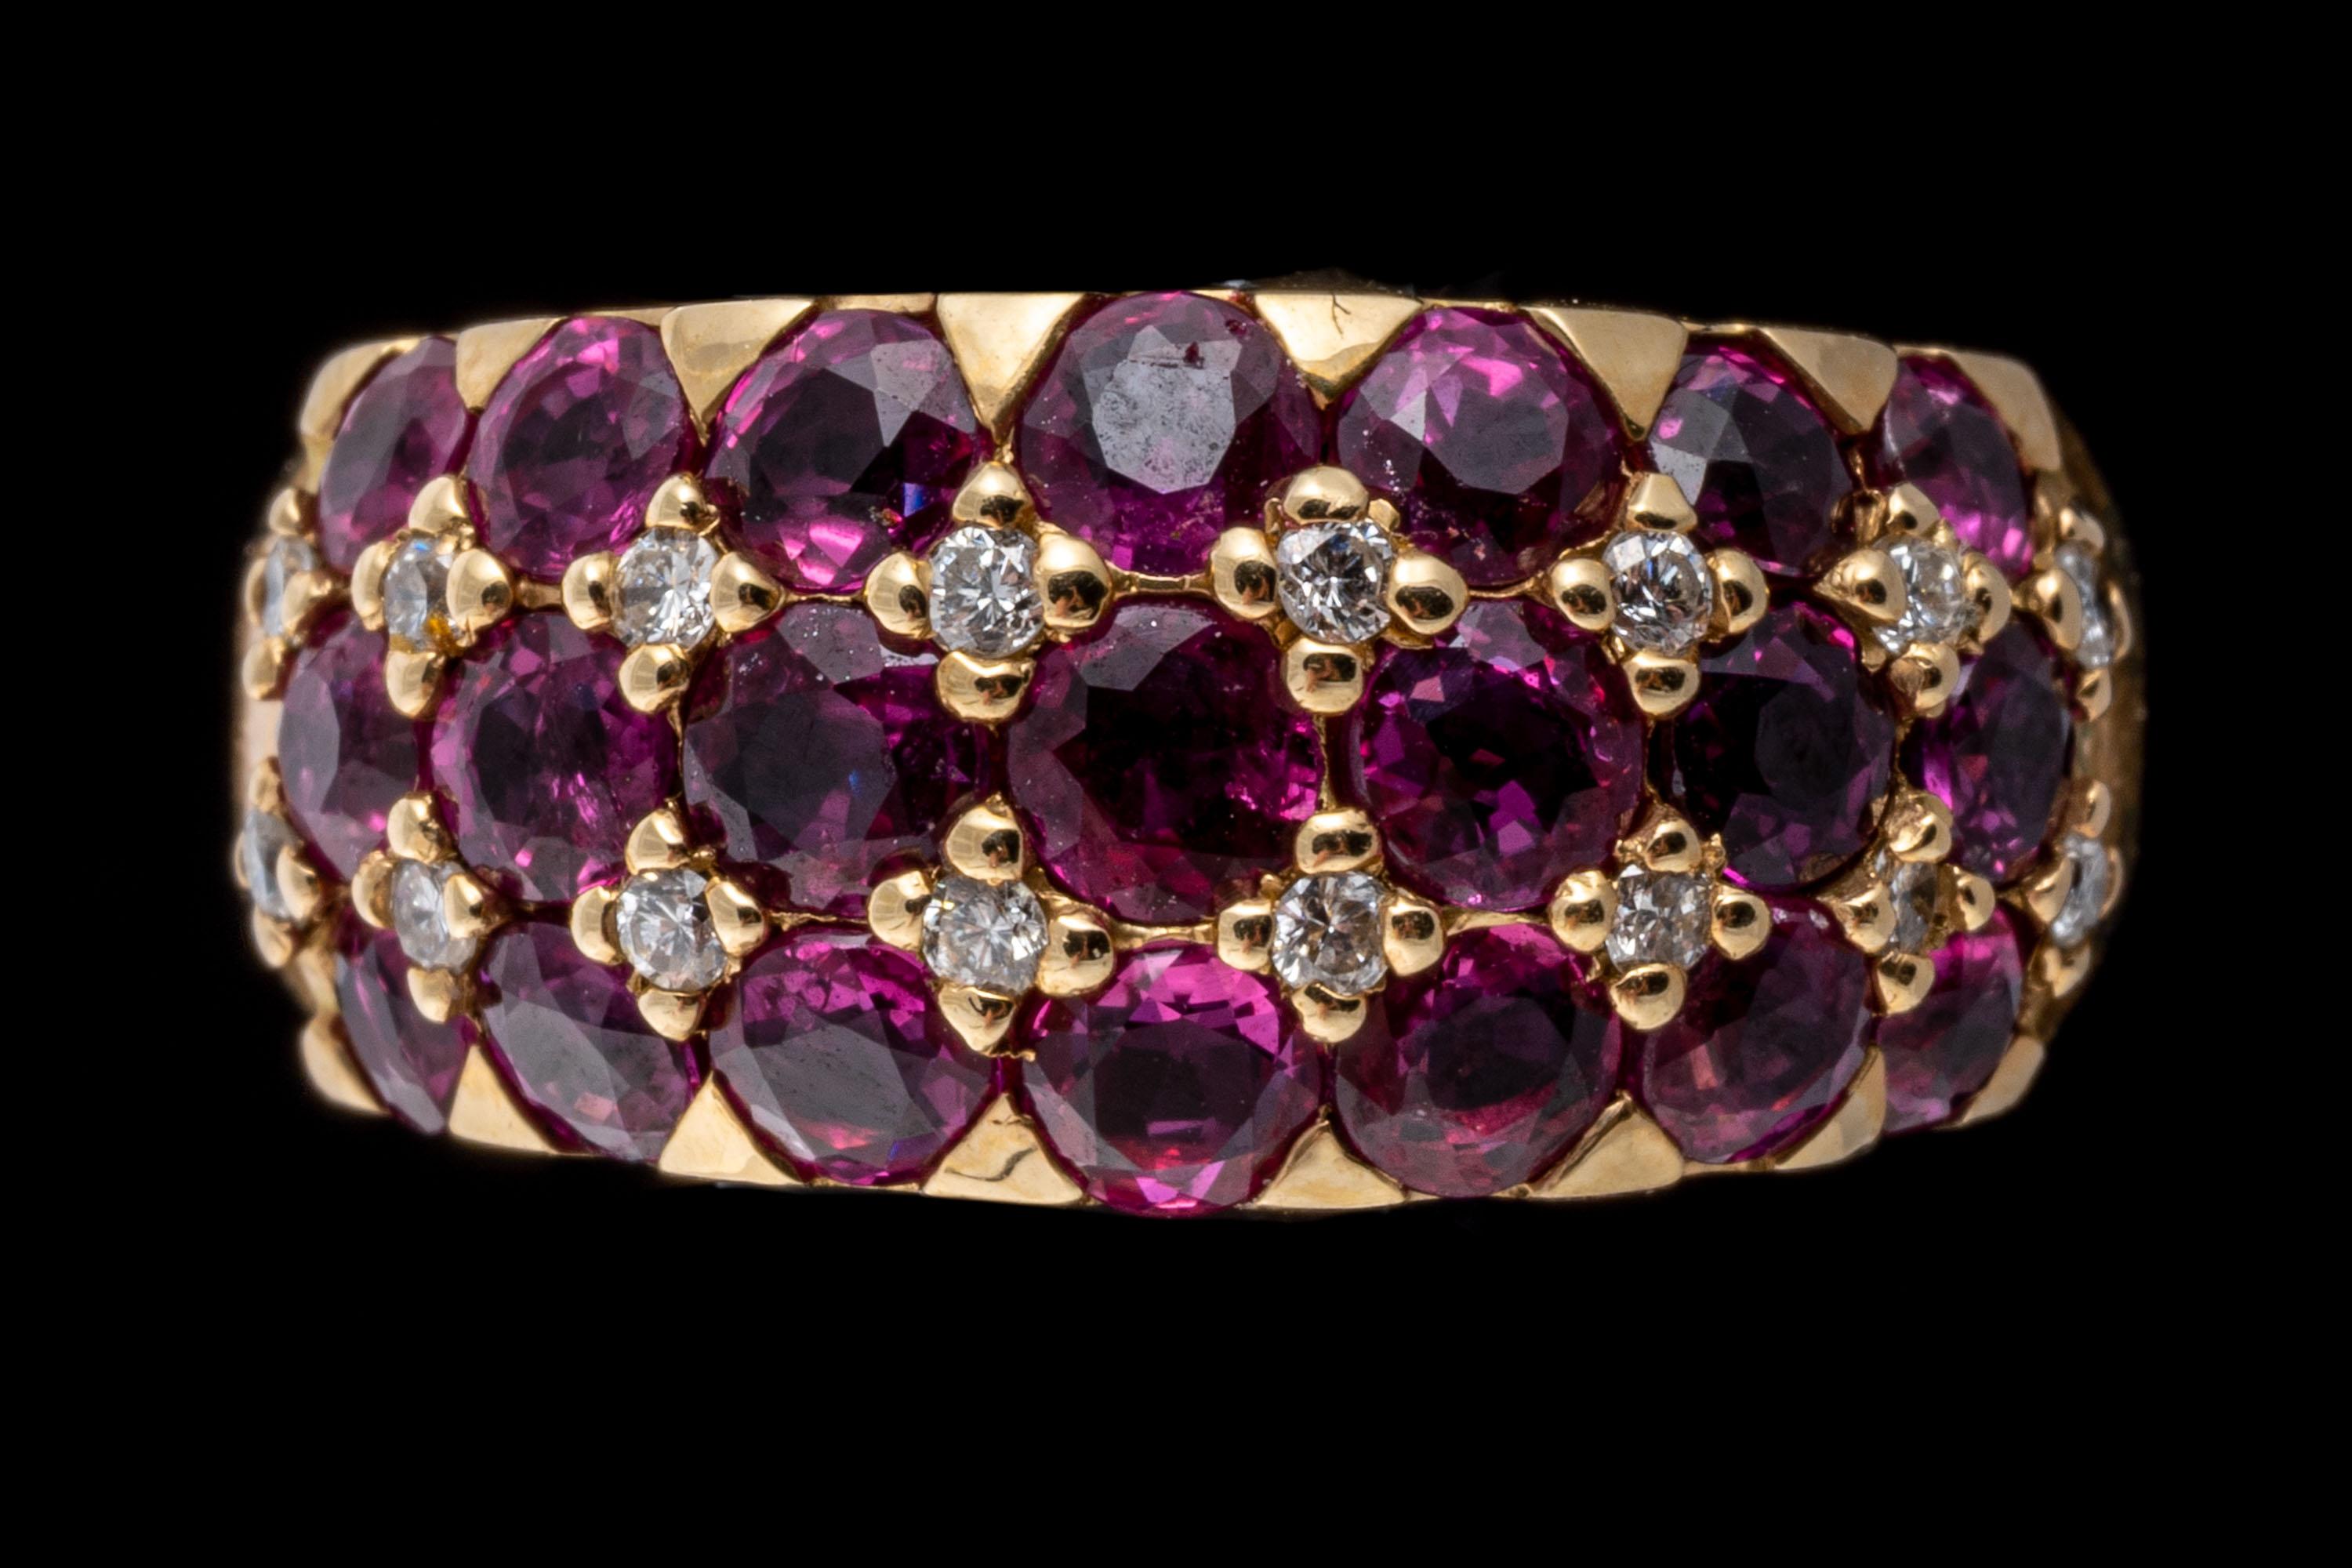 14k yellow gold ring. This gorgeous ring is a five row, bombe dome style, featuring three rows of round faceted, reddish pink color rubies, approximately 3.12 TCW, prong set, alternating with rows of round faceted diamonds, approximately 0.08 TCW,